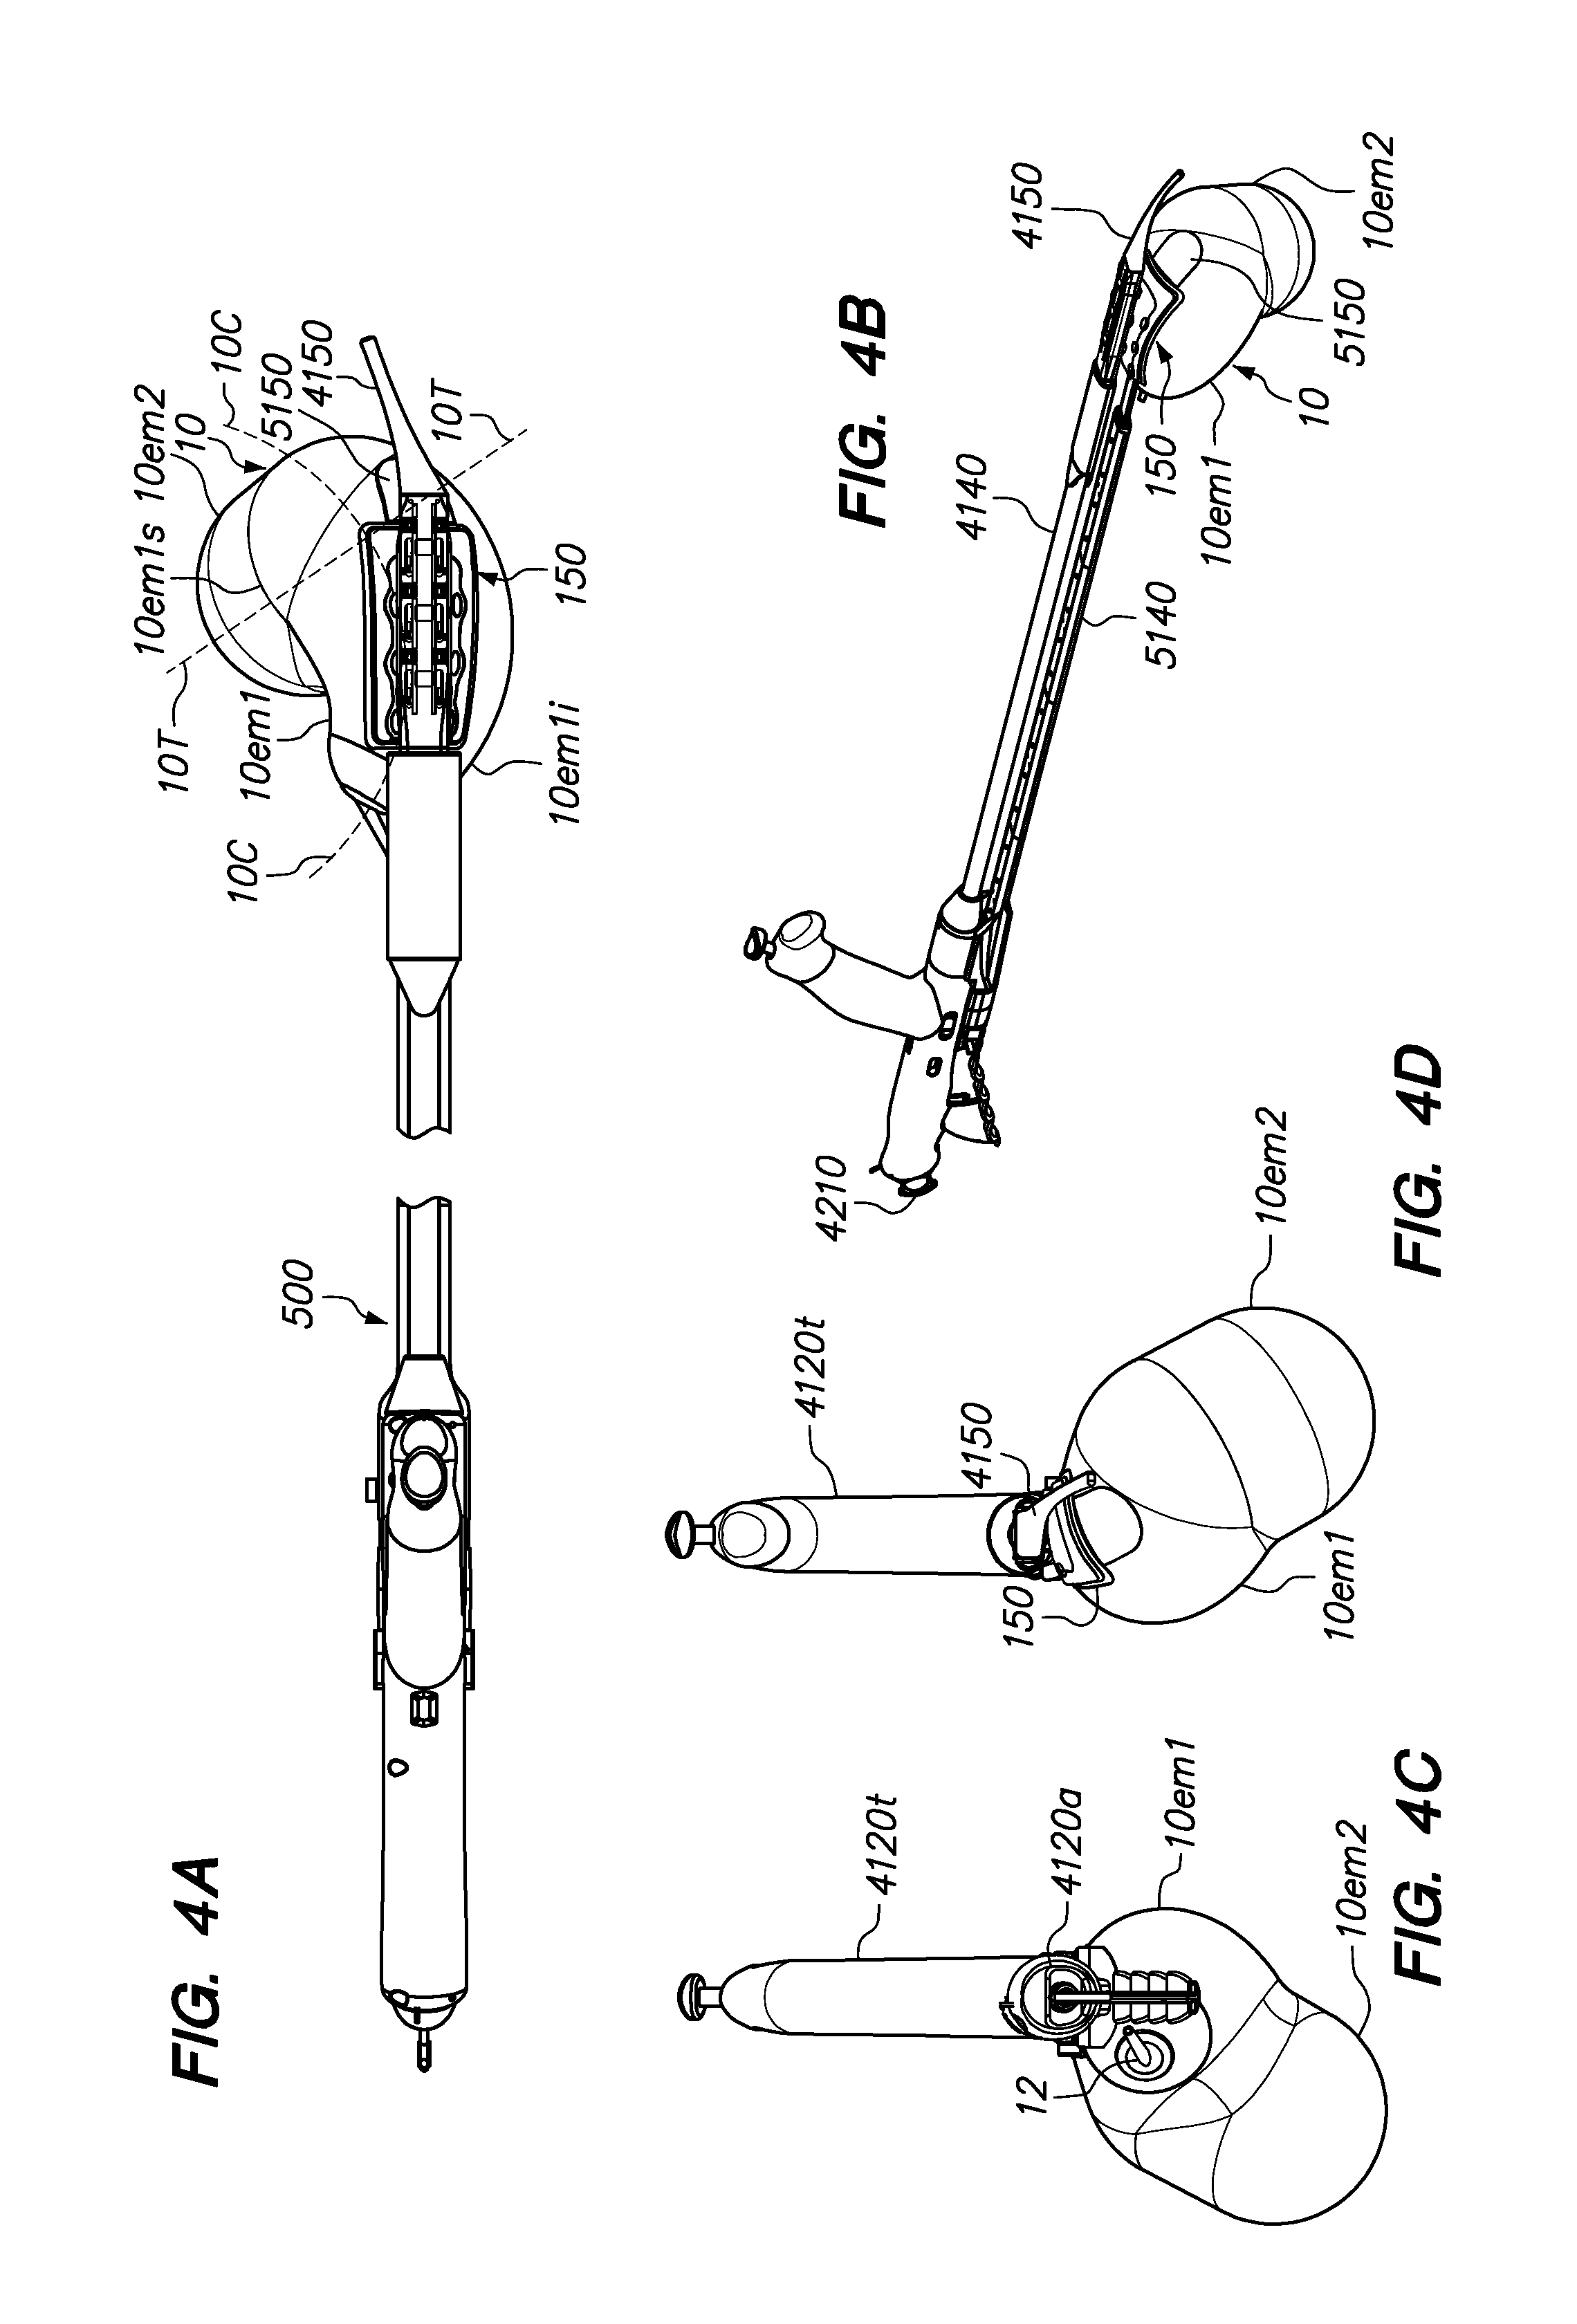 Devices, tools and methods for performing minimally invasive abdominal surgical procedures